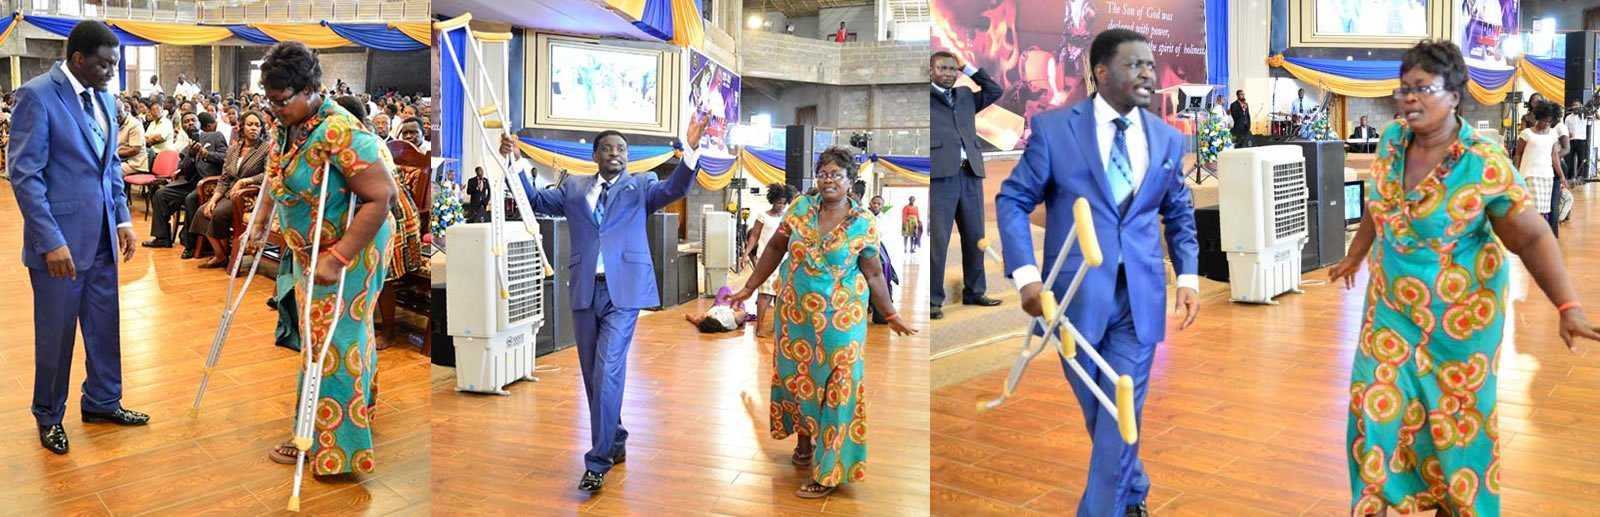 Woman being healed by the power of God through Bishop Charles Agyinasare